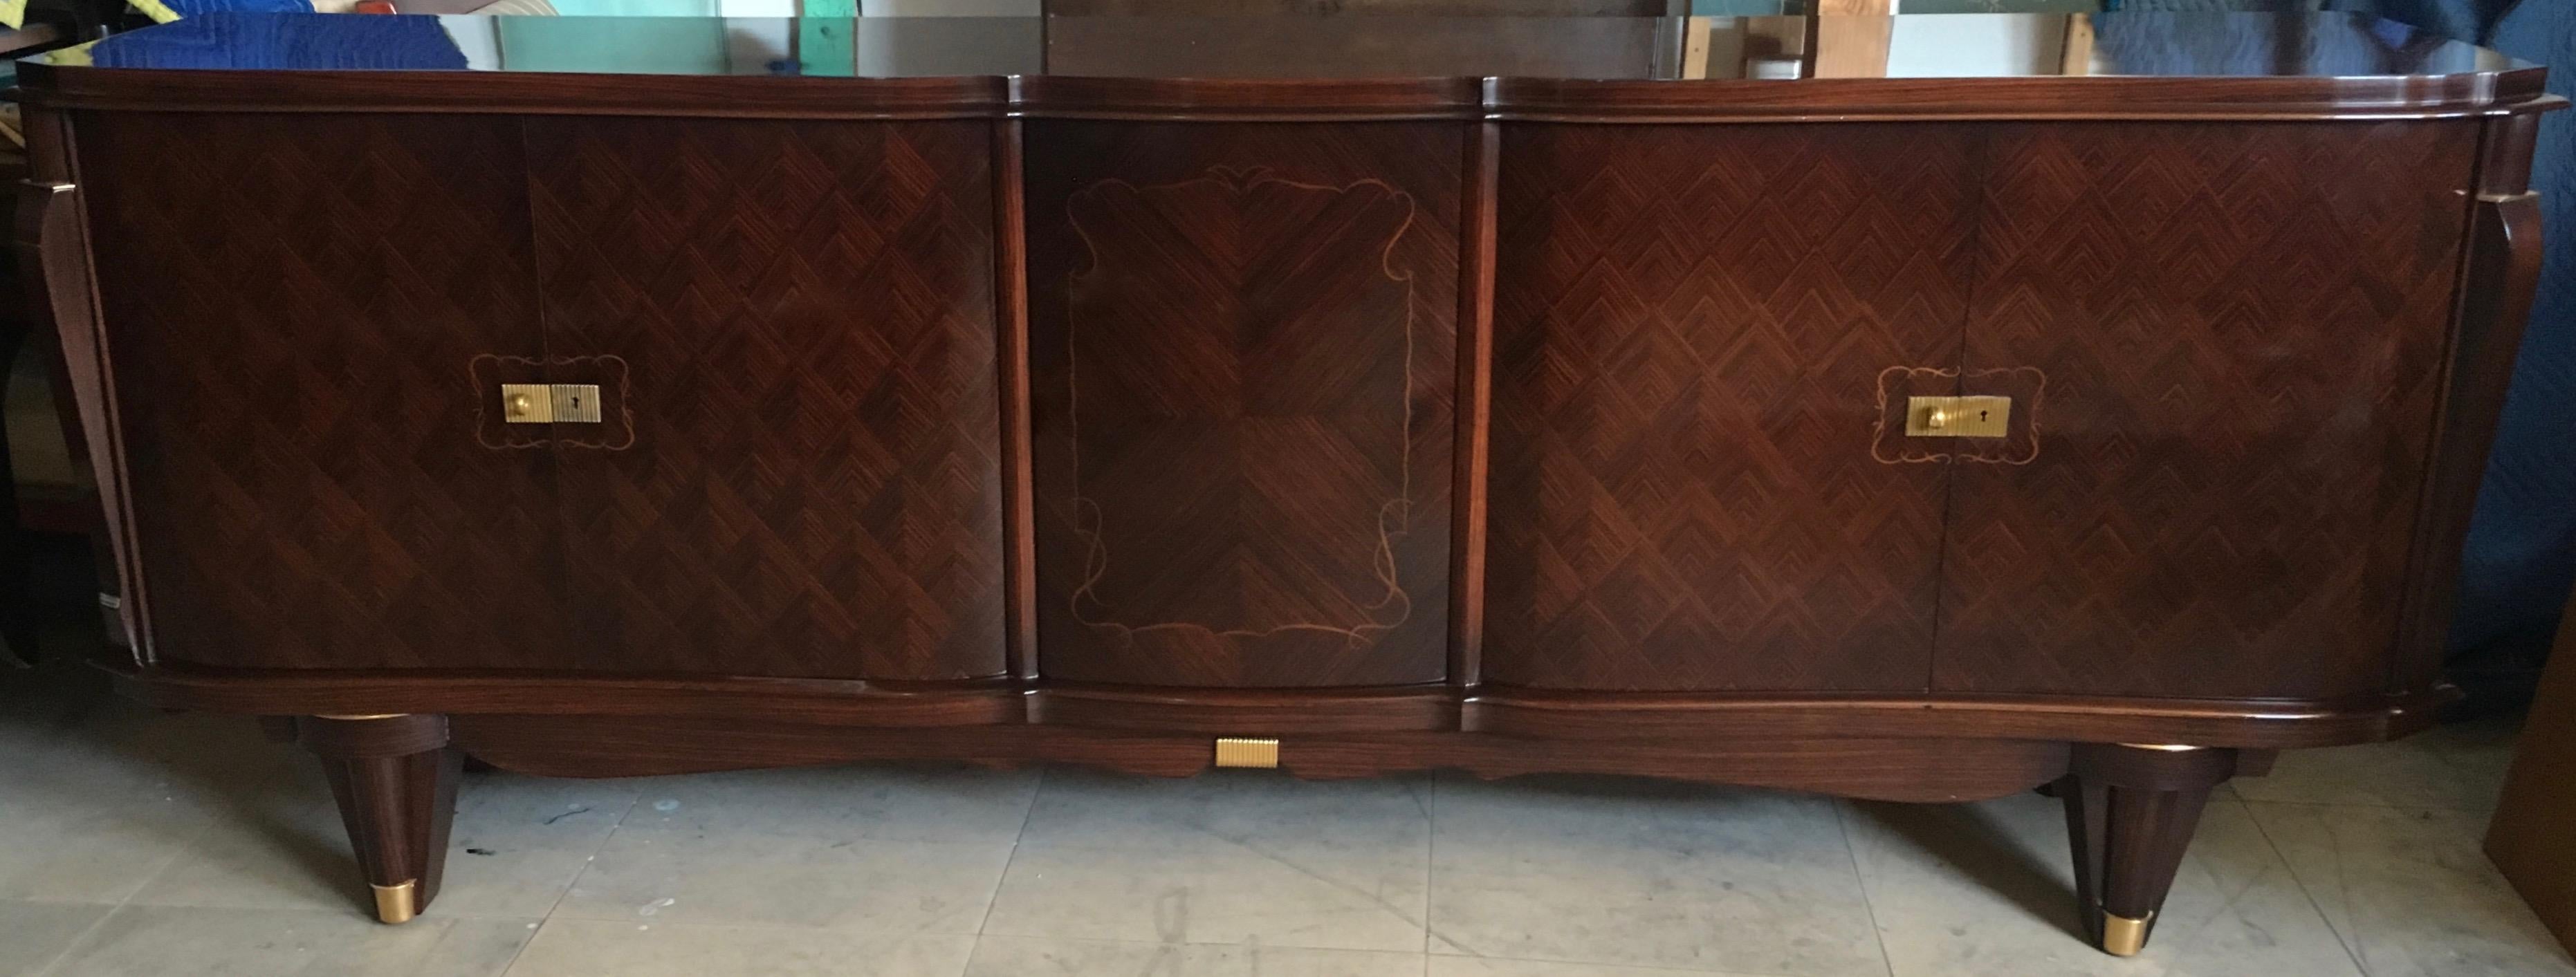 Art Deco French Buffet, circa 1940 in Matchbook Pattern Rosewood  For Sale 8